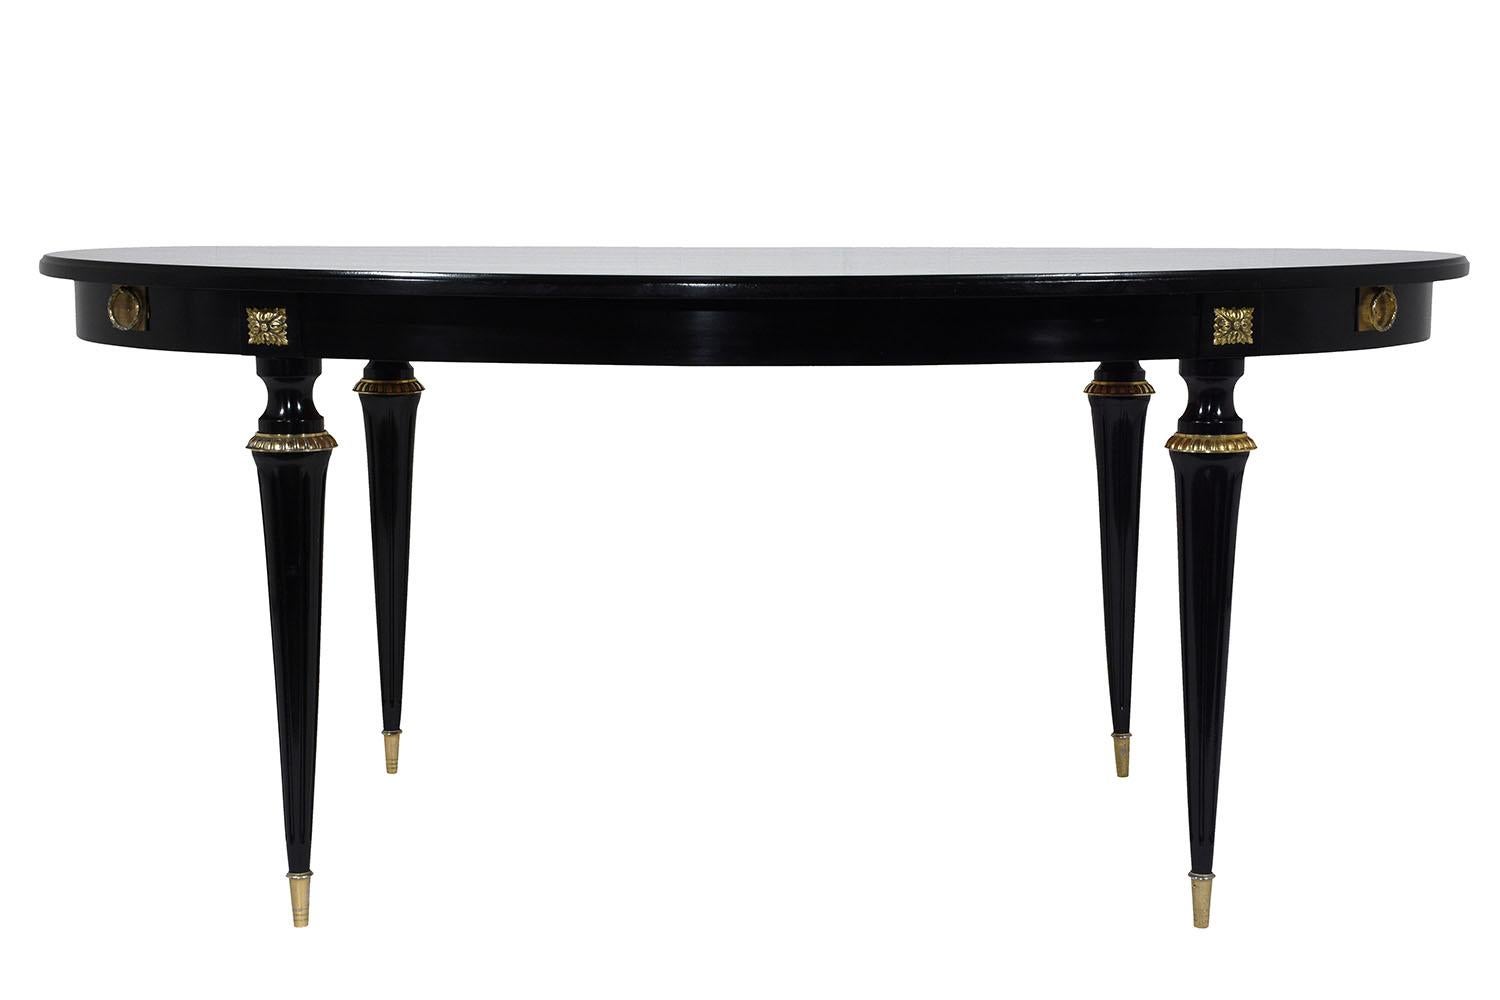 This 1950s French Louis XVI-style dining table is made of mahogany wood ebonized in a rich black color with a lacquered finish. The oval shaped table is elegantly adorned with brass accents along the edge. The carved legs feature fluted details and